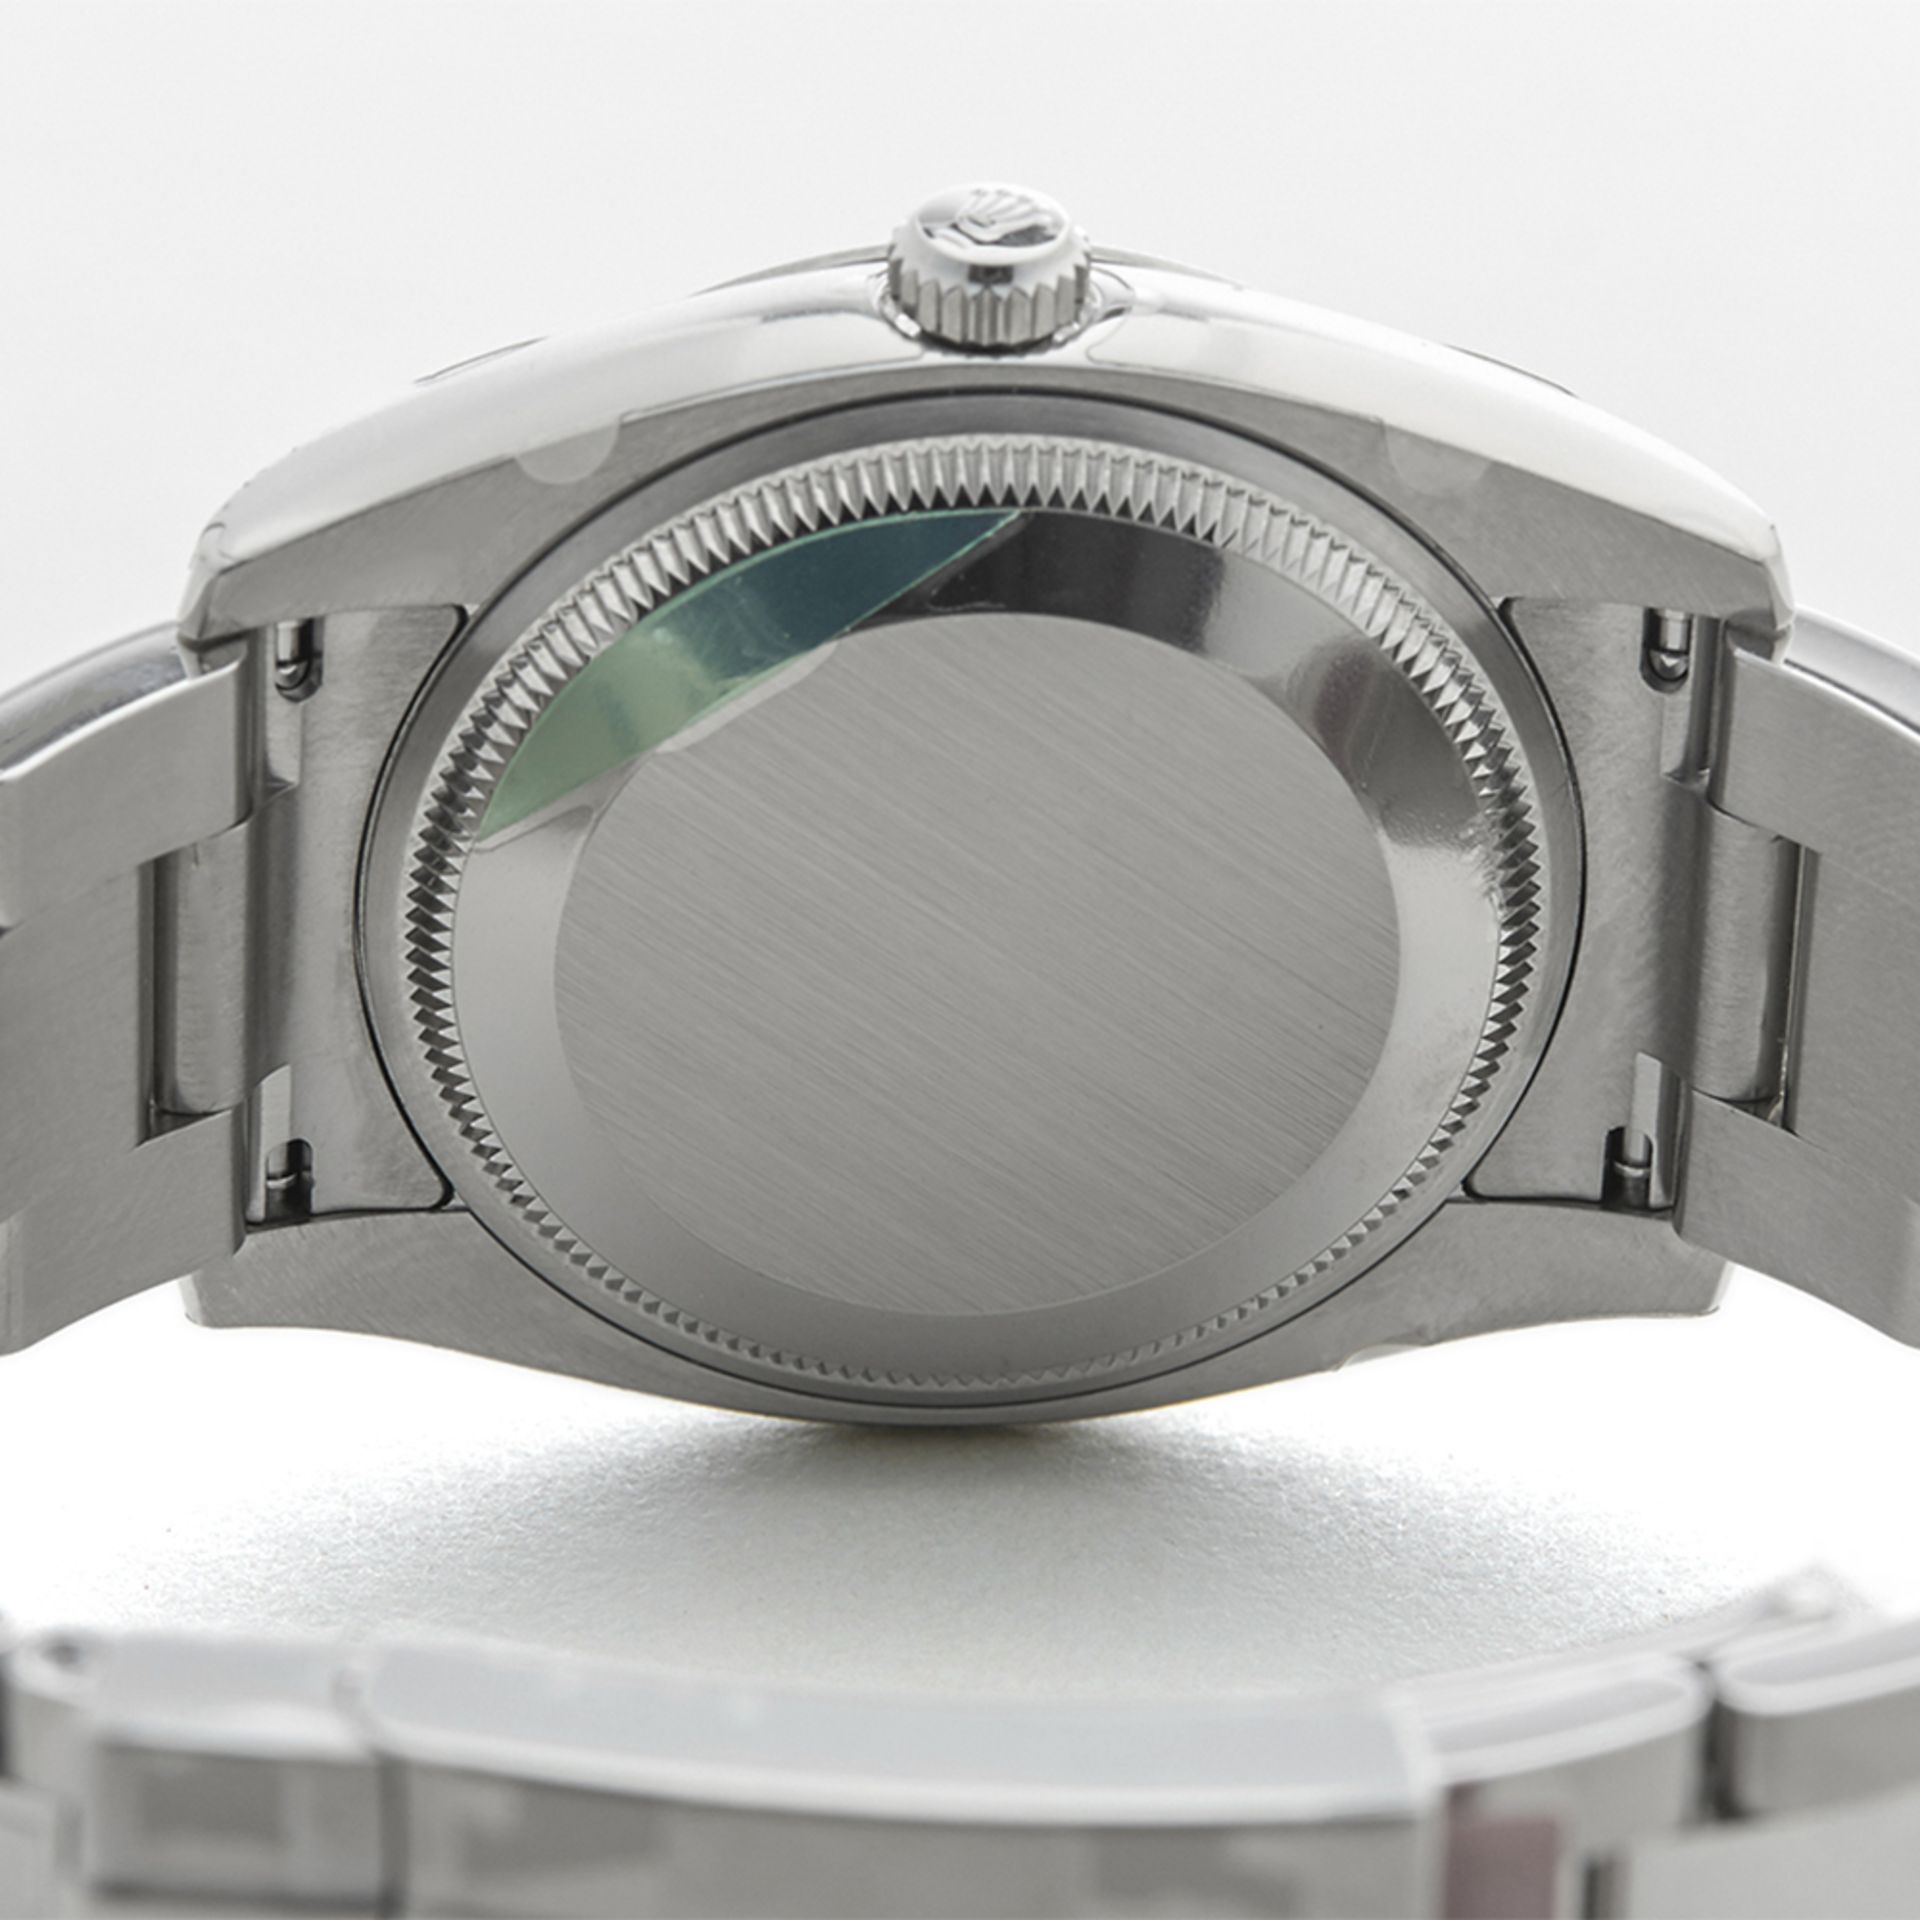 Oyster Perpetual Date 34mm Stainless Steel - 115210 - Image 8 of 9